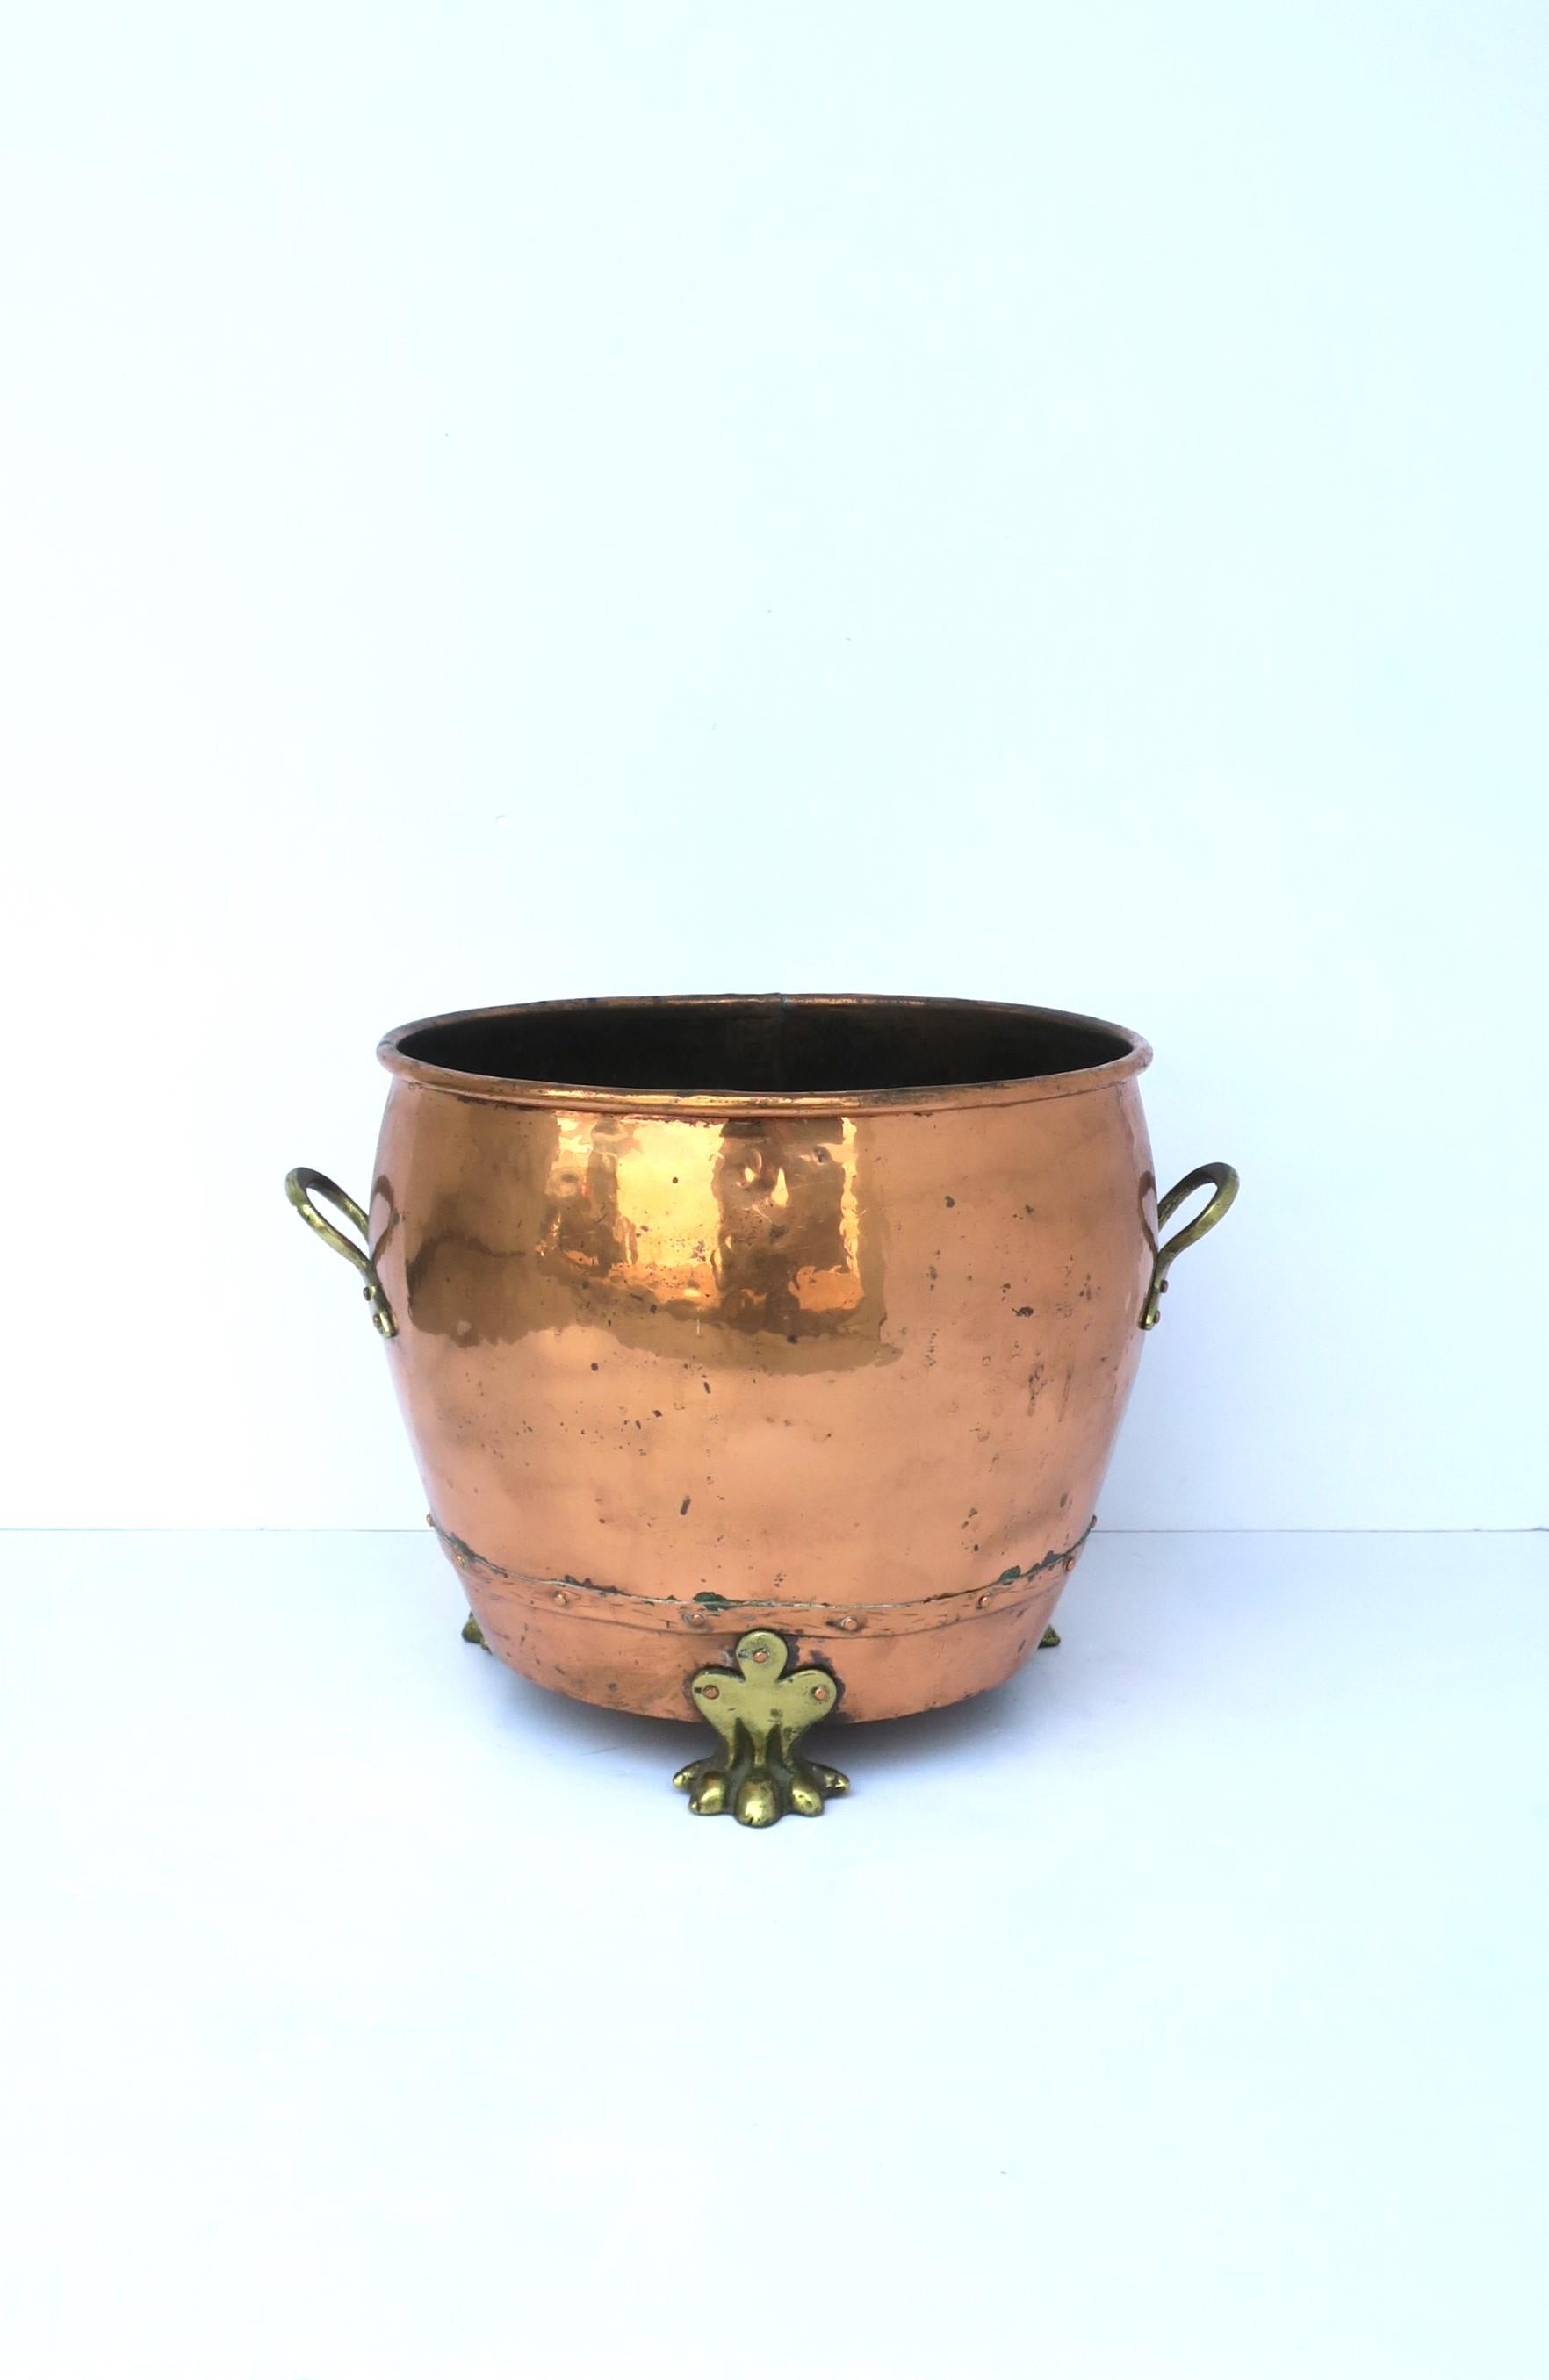 A substantial English fireplace copper and brass chimney or firewood pot with lion paw feet, circa late 19th century to early-20th century, England. Pot is copper with brass handles on either side, brass tri-base lion paw feet, and rivet detail.